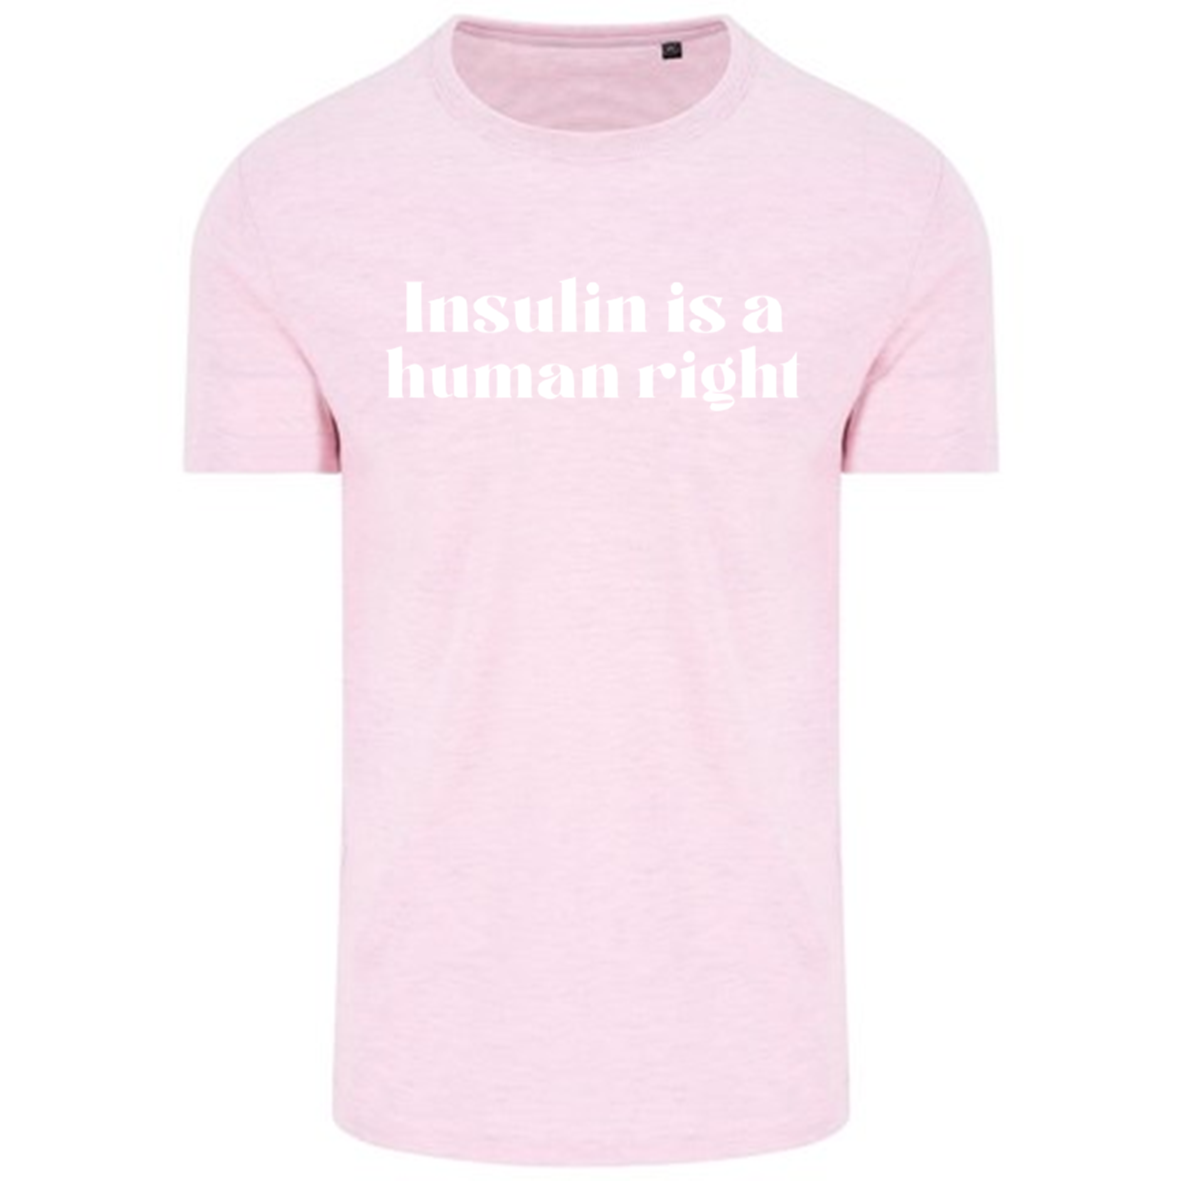 Insulin Is A Human Right Pastel T-Shirt